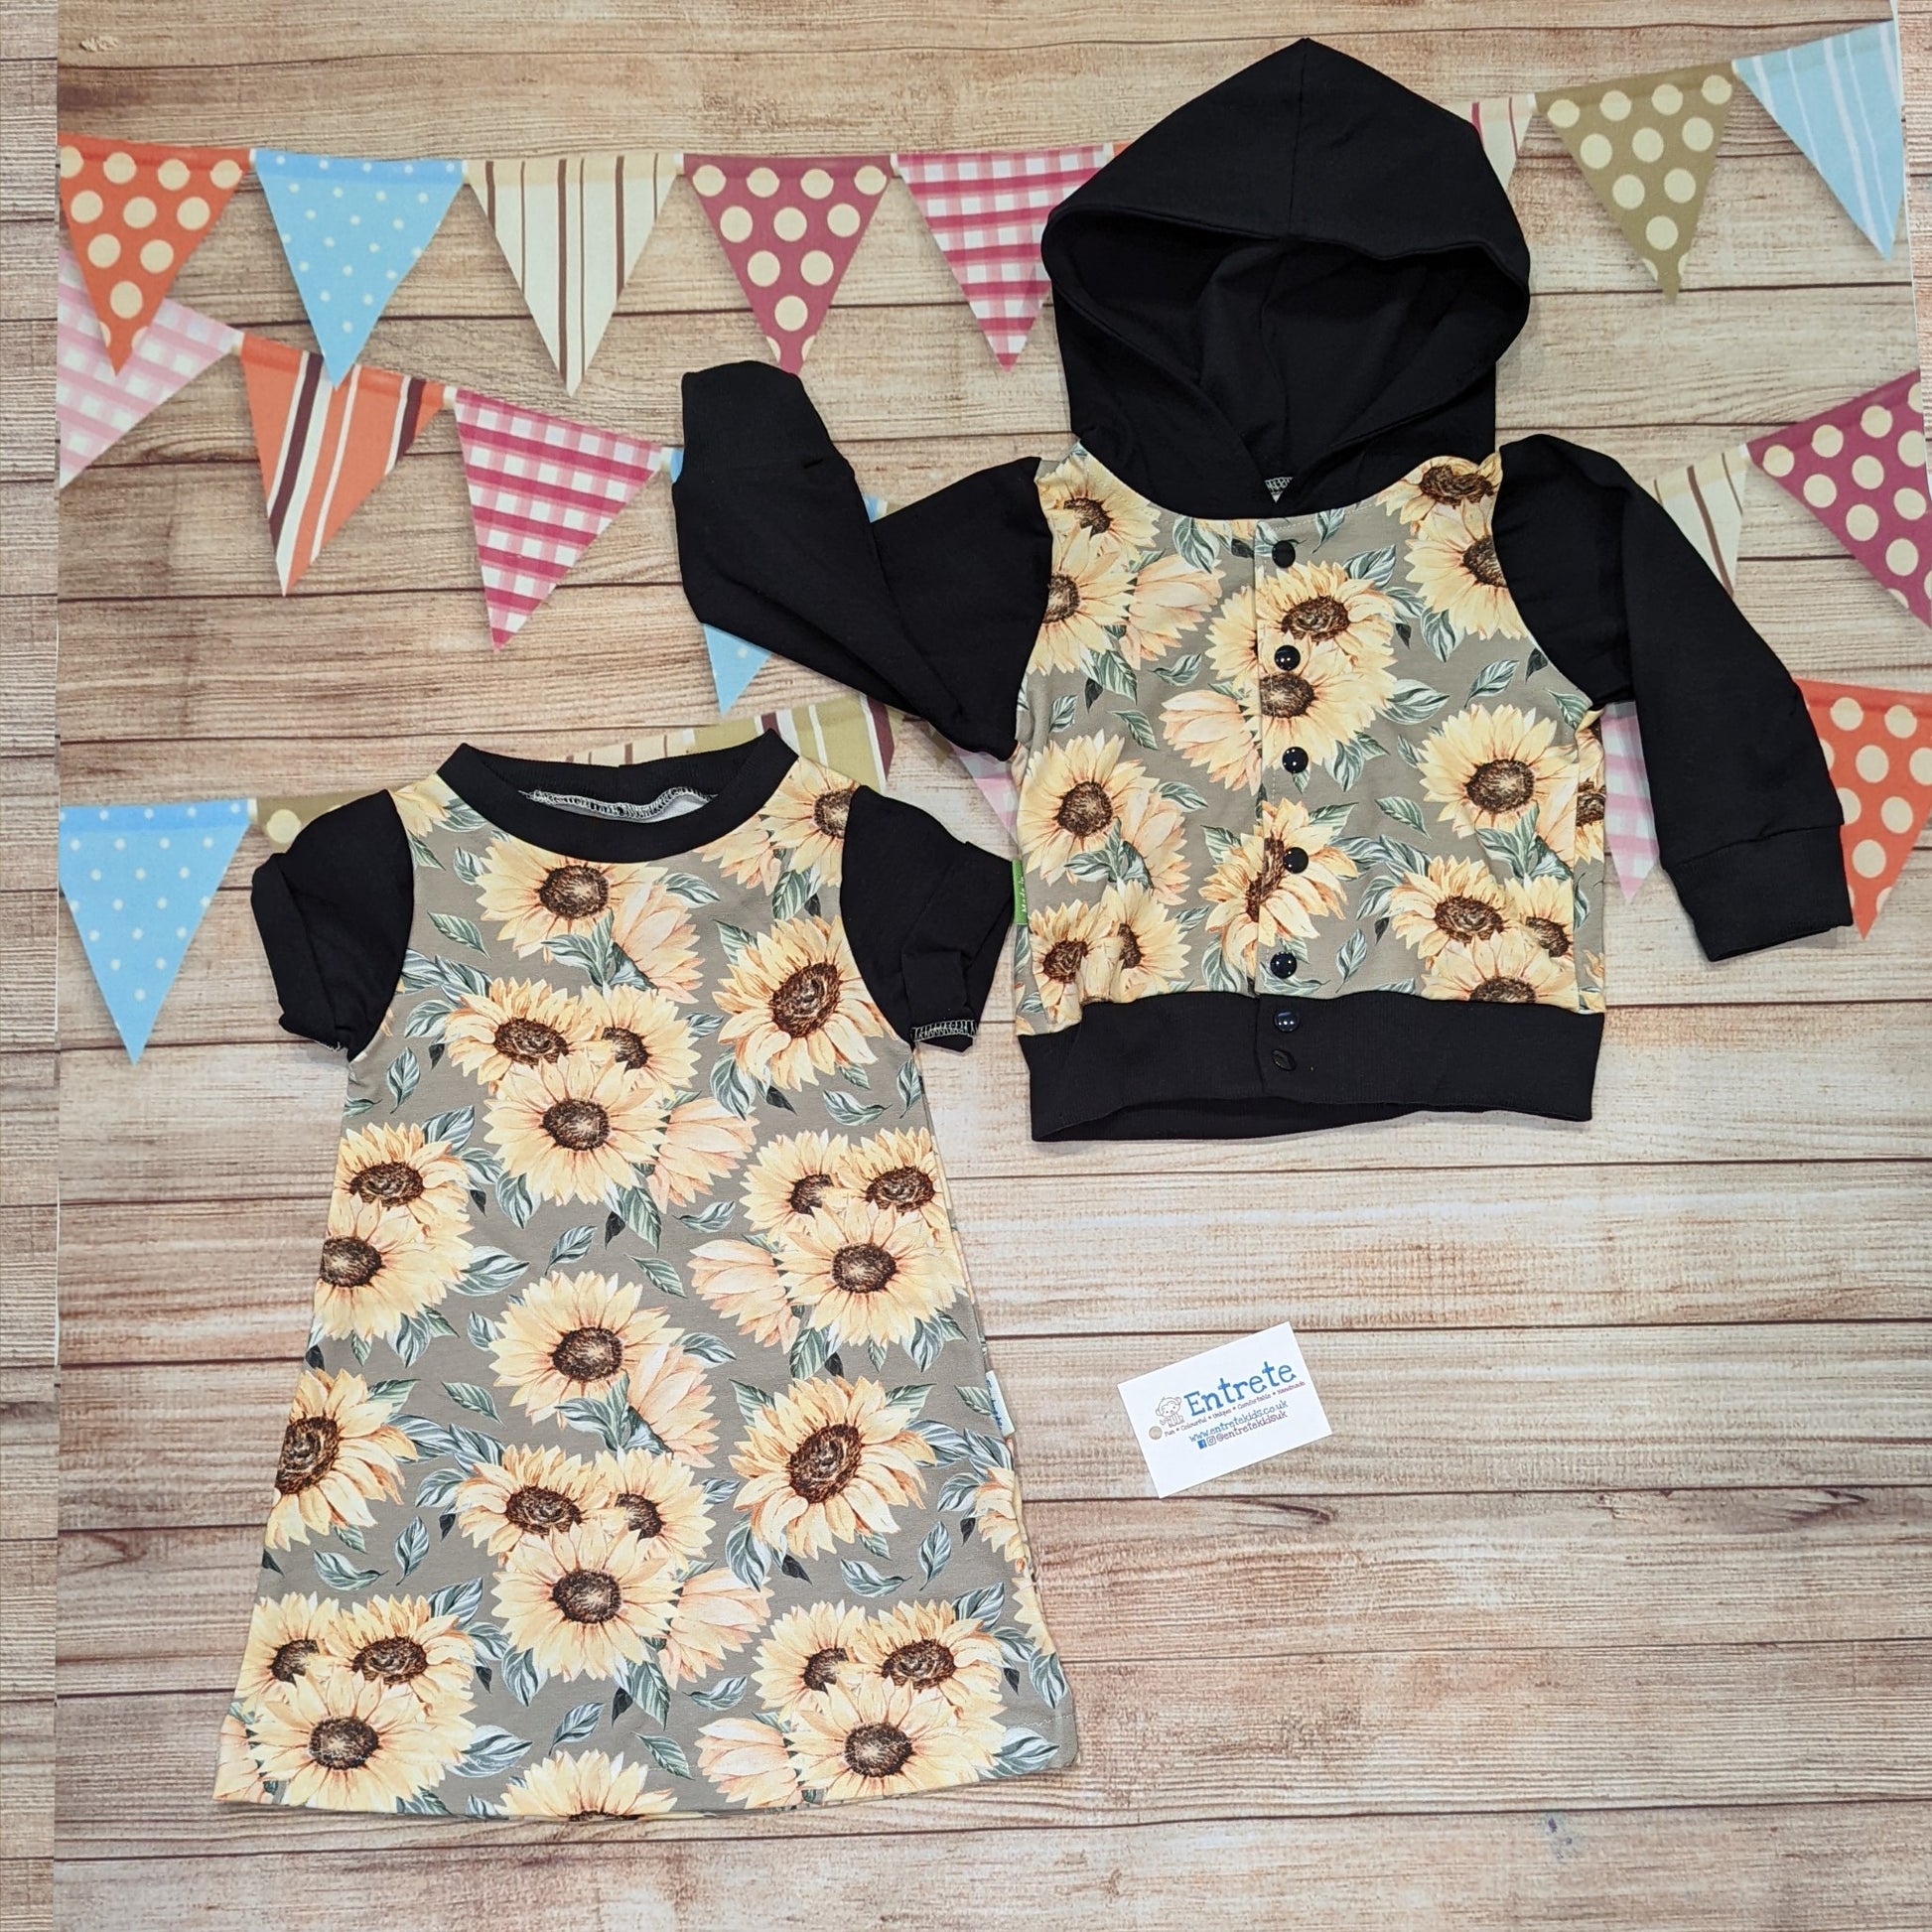 The warm sunflower T-shirt dress, handmade using sunflowers cotton French terry, black cotton jersey and black cotton ribbing. Short sleeved version shown with a matching popper hoodie.